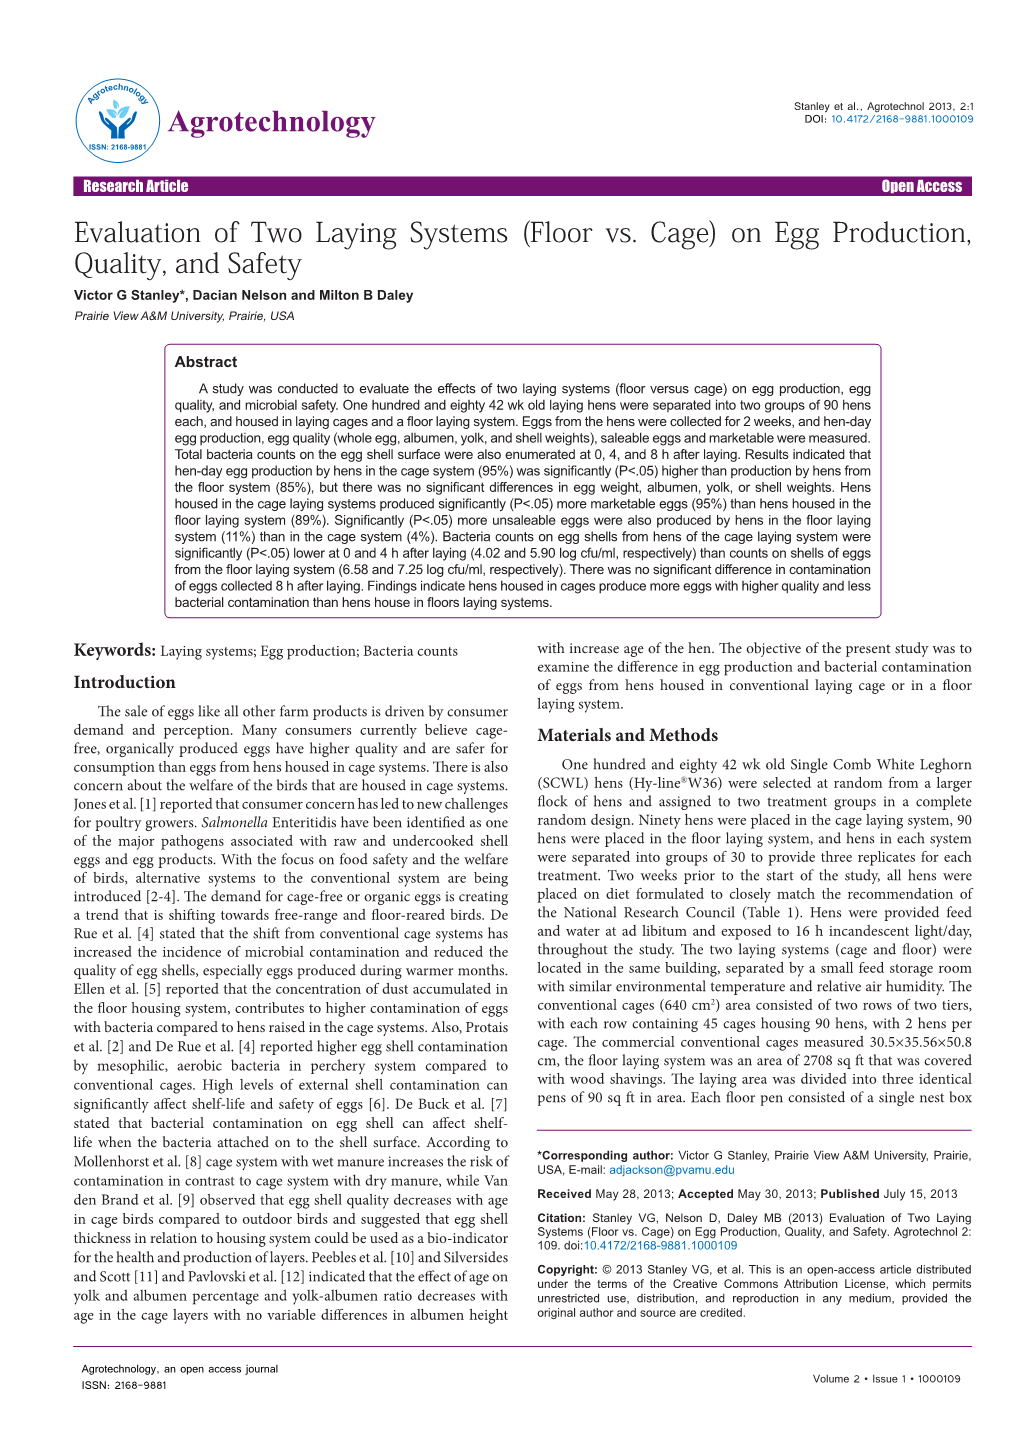 Evaluation of Two Laying Systems (Floor Vs. Cage) on Egg Production